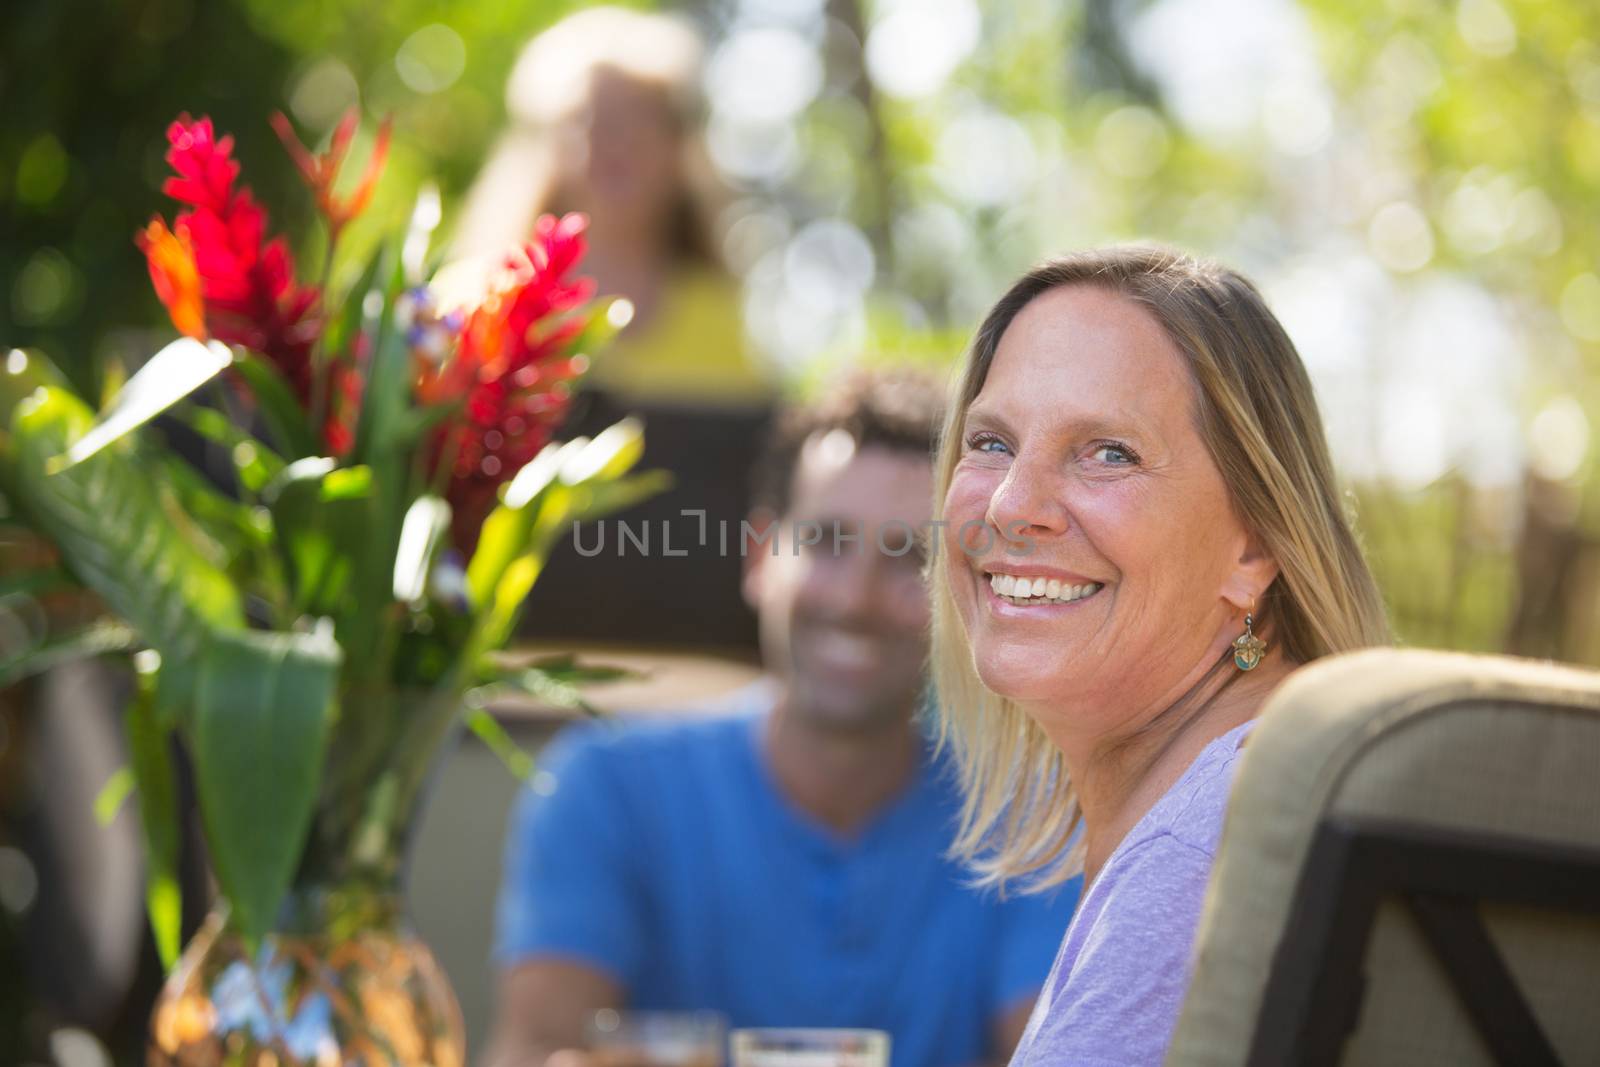 Smiling Woman at Table on Vacation by Creatista